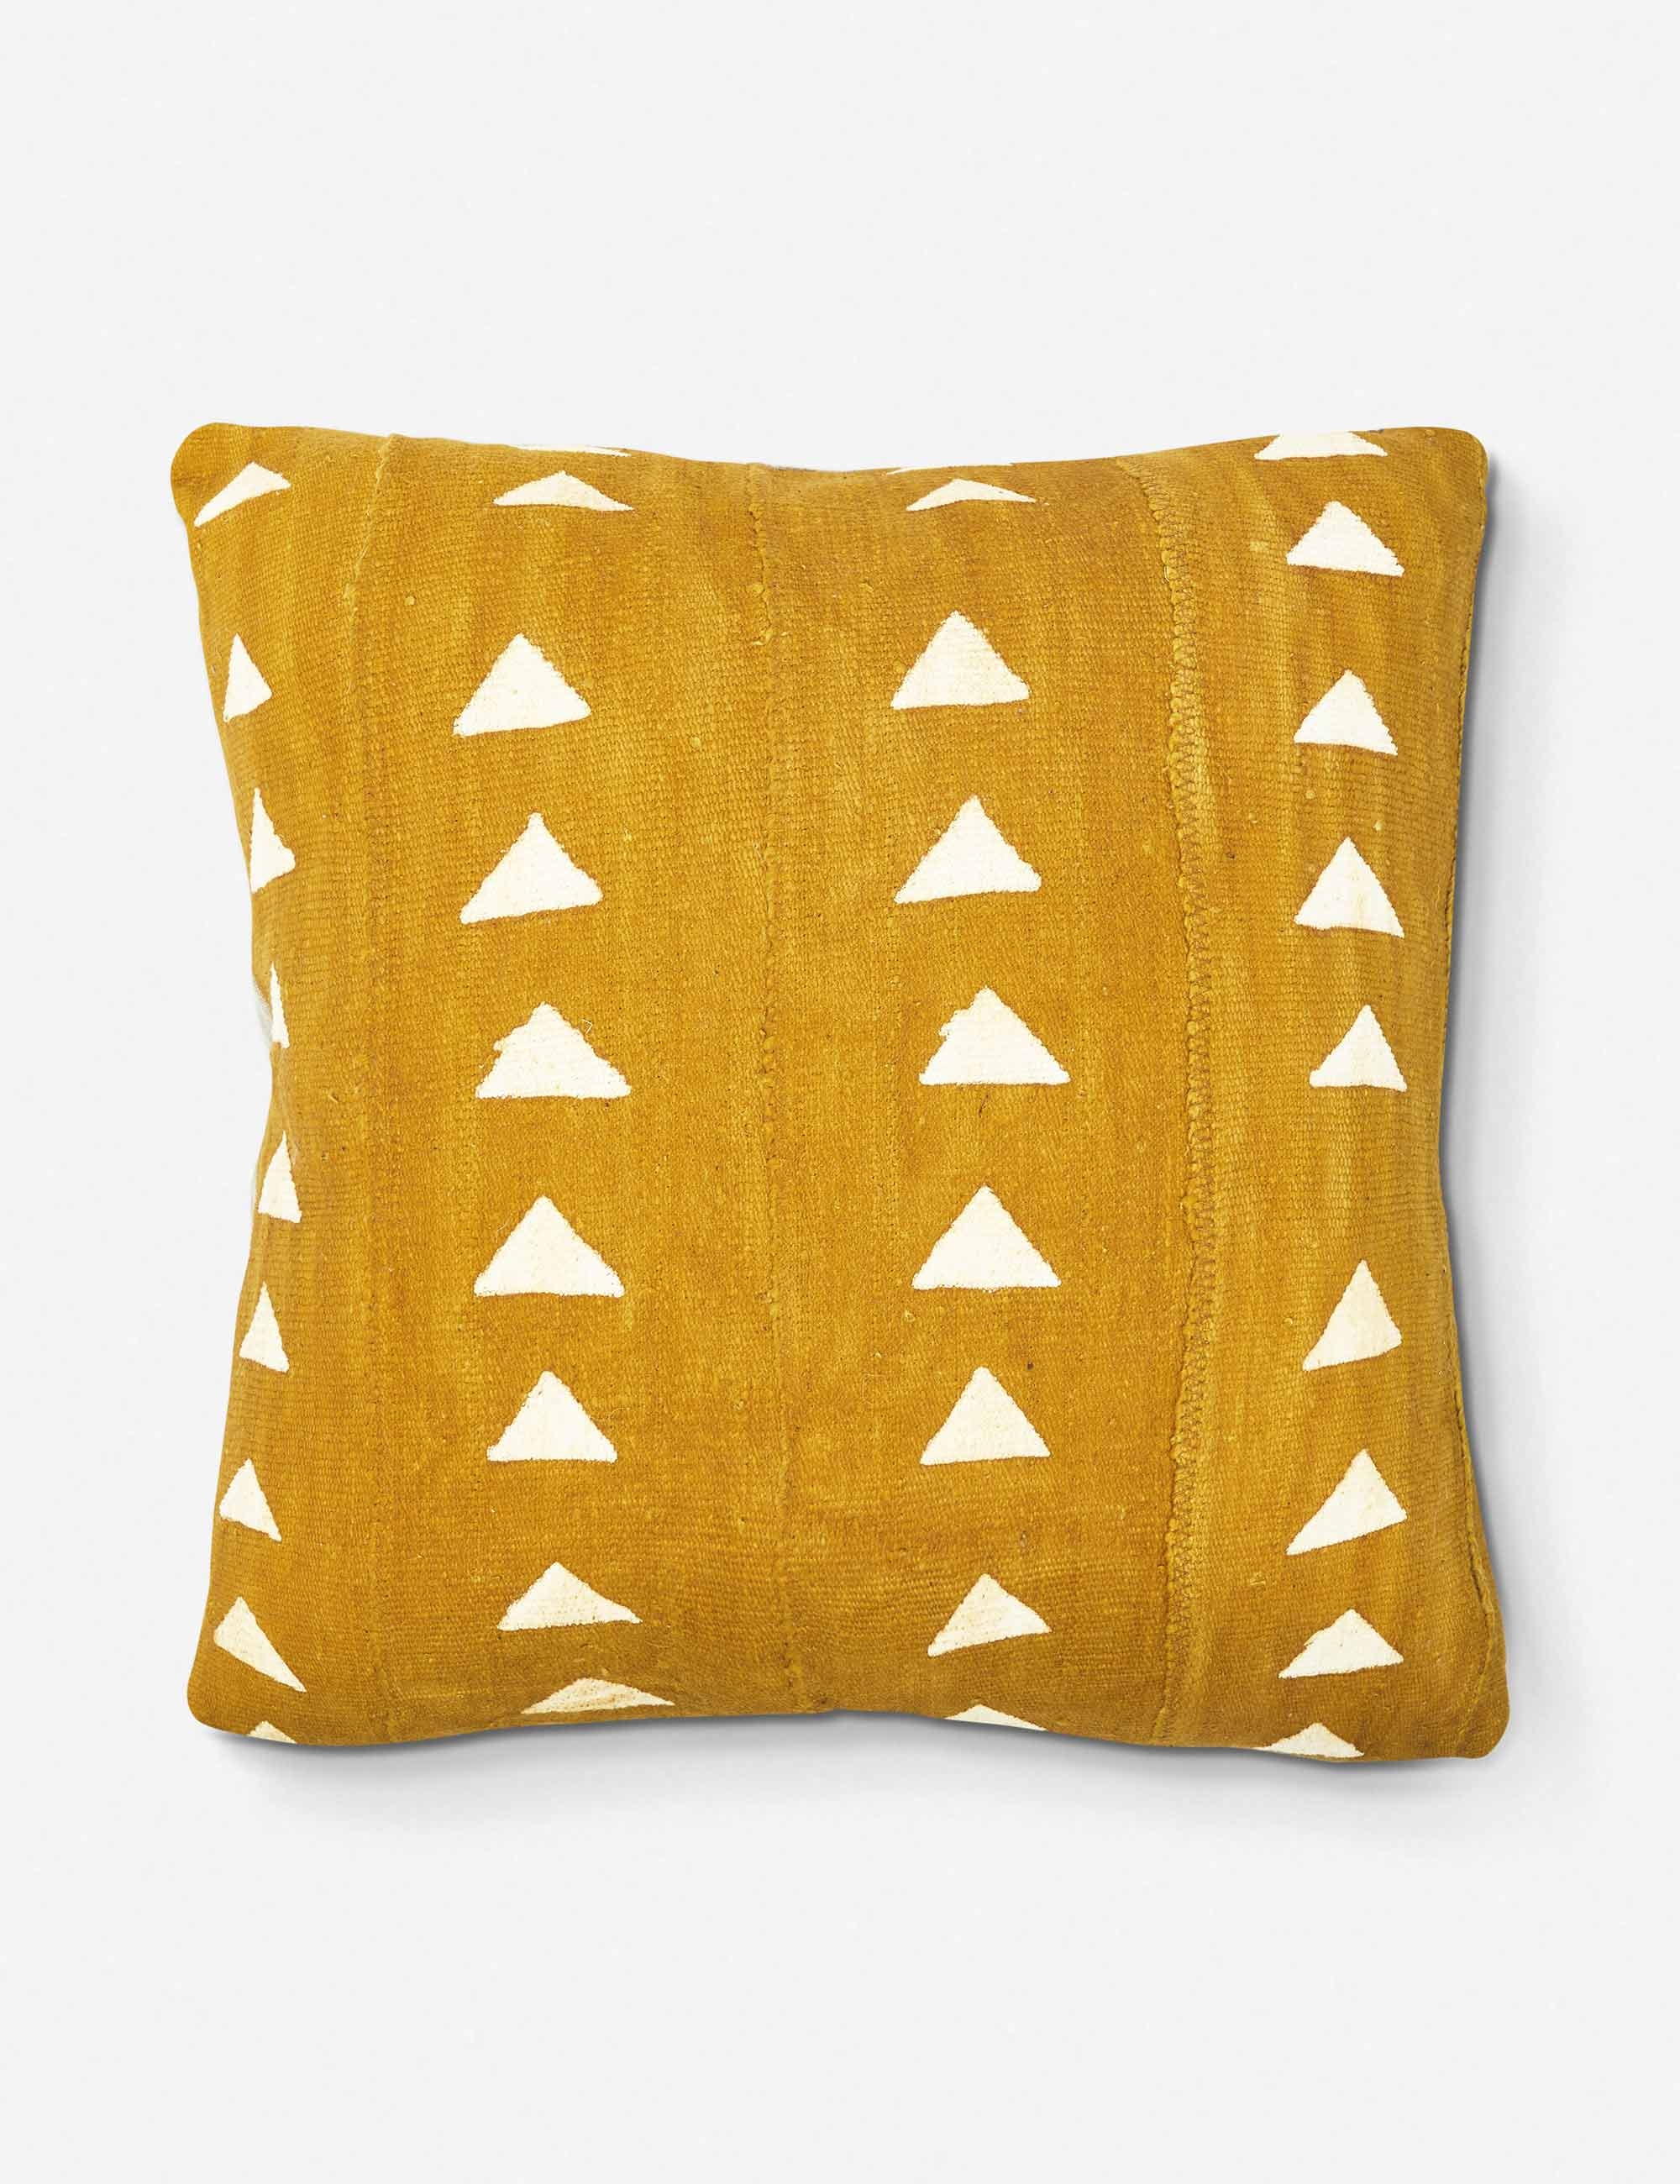 Imani One-of-a-kind Mudcloth Pillow - Image 0